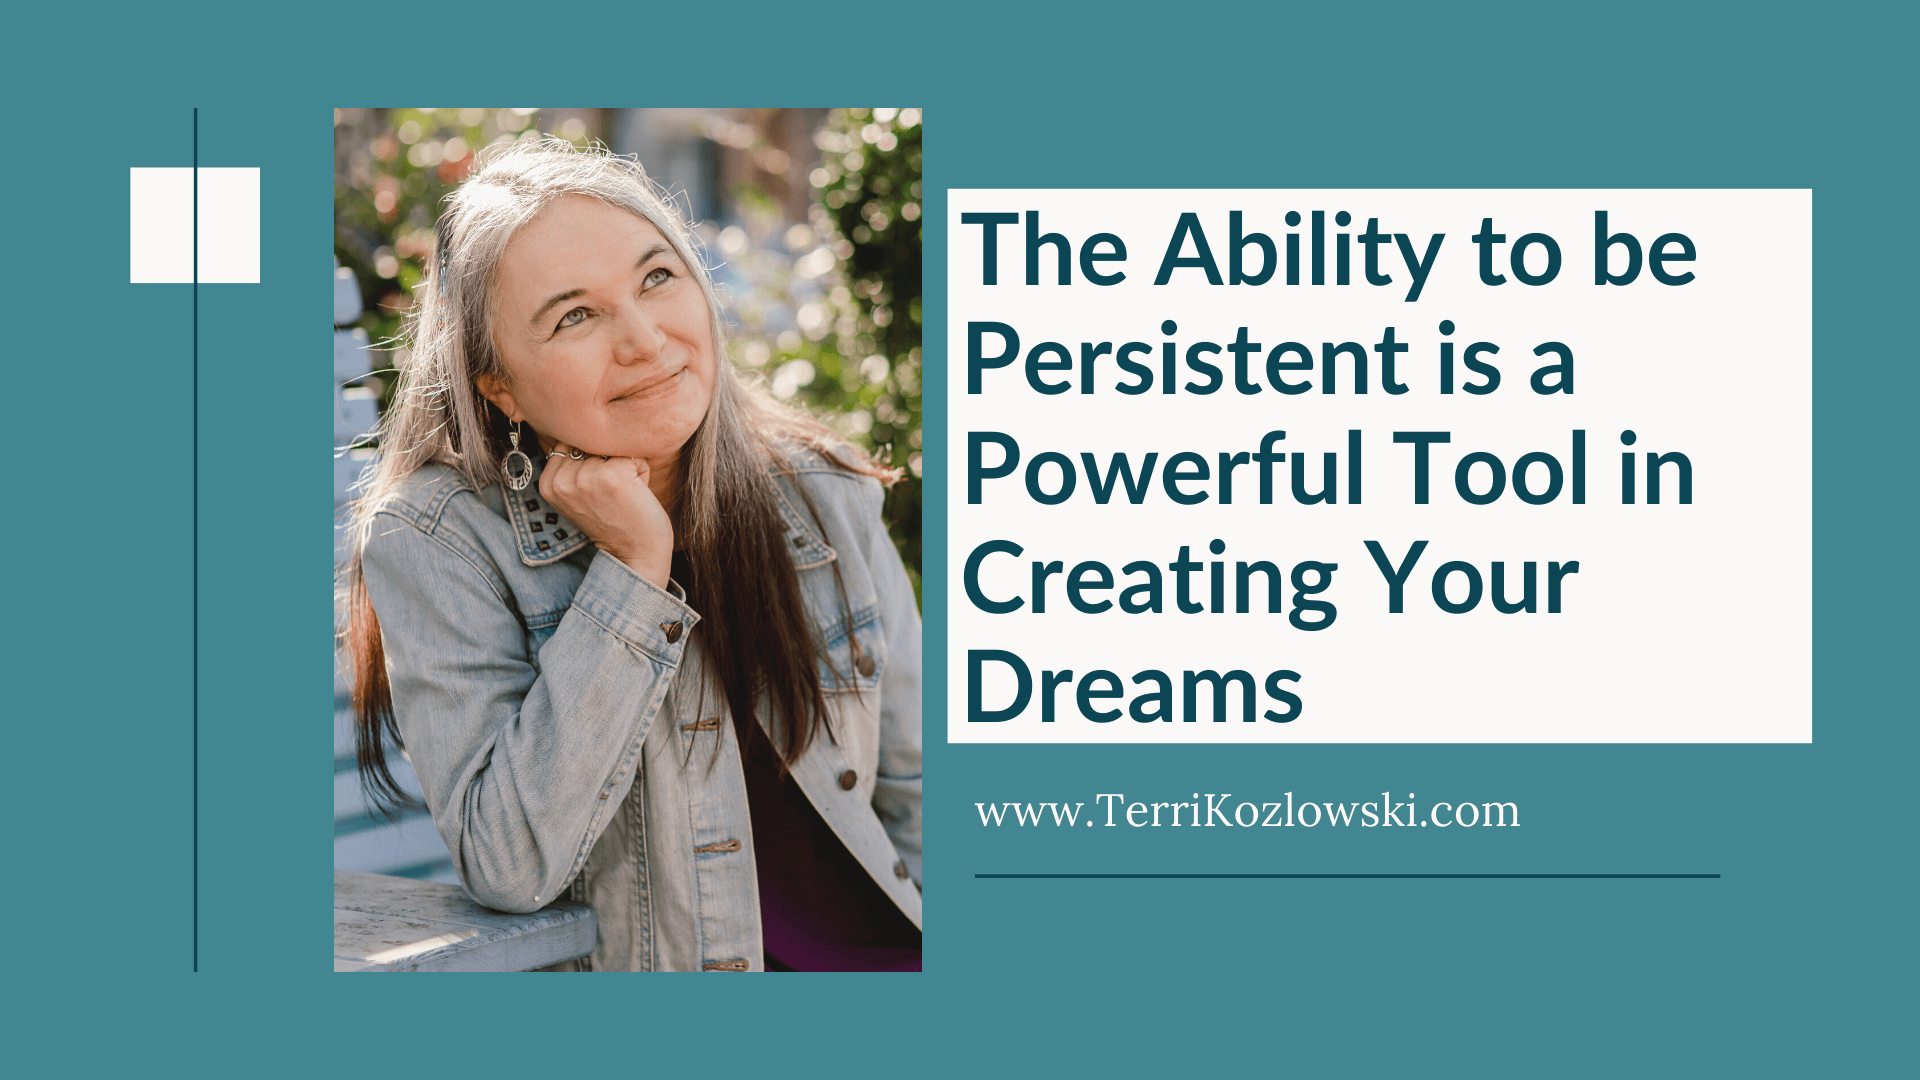 The Ability to be Persistent is a Powerful Tool in Creating Your Dreams